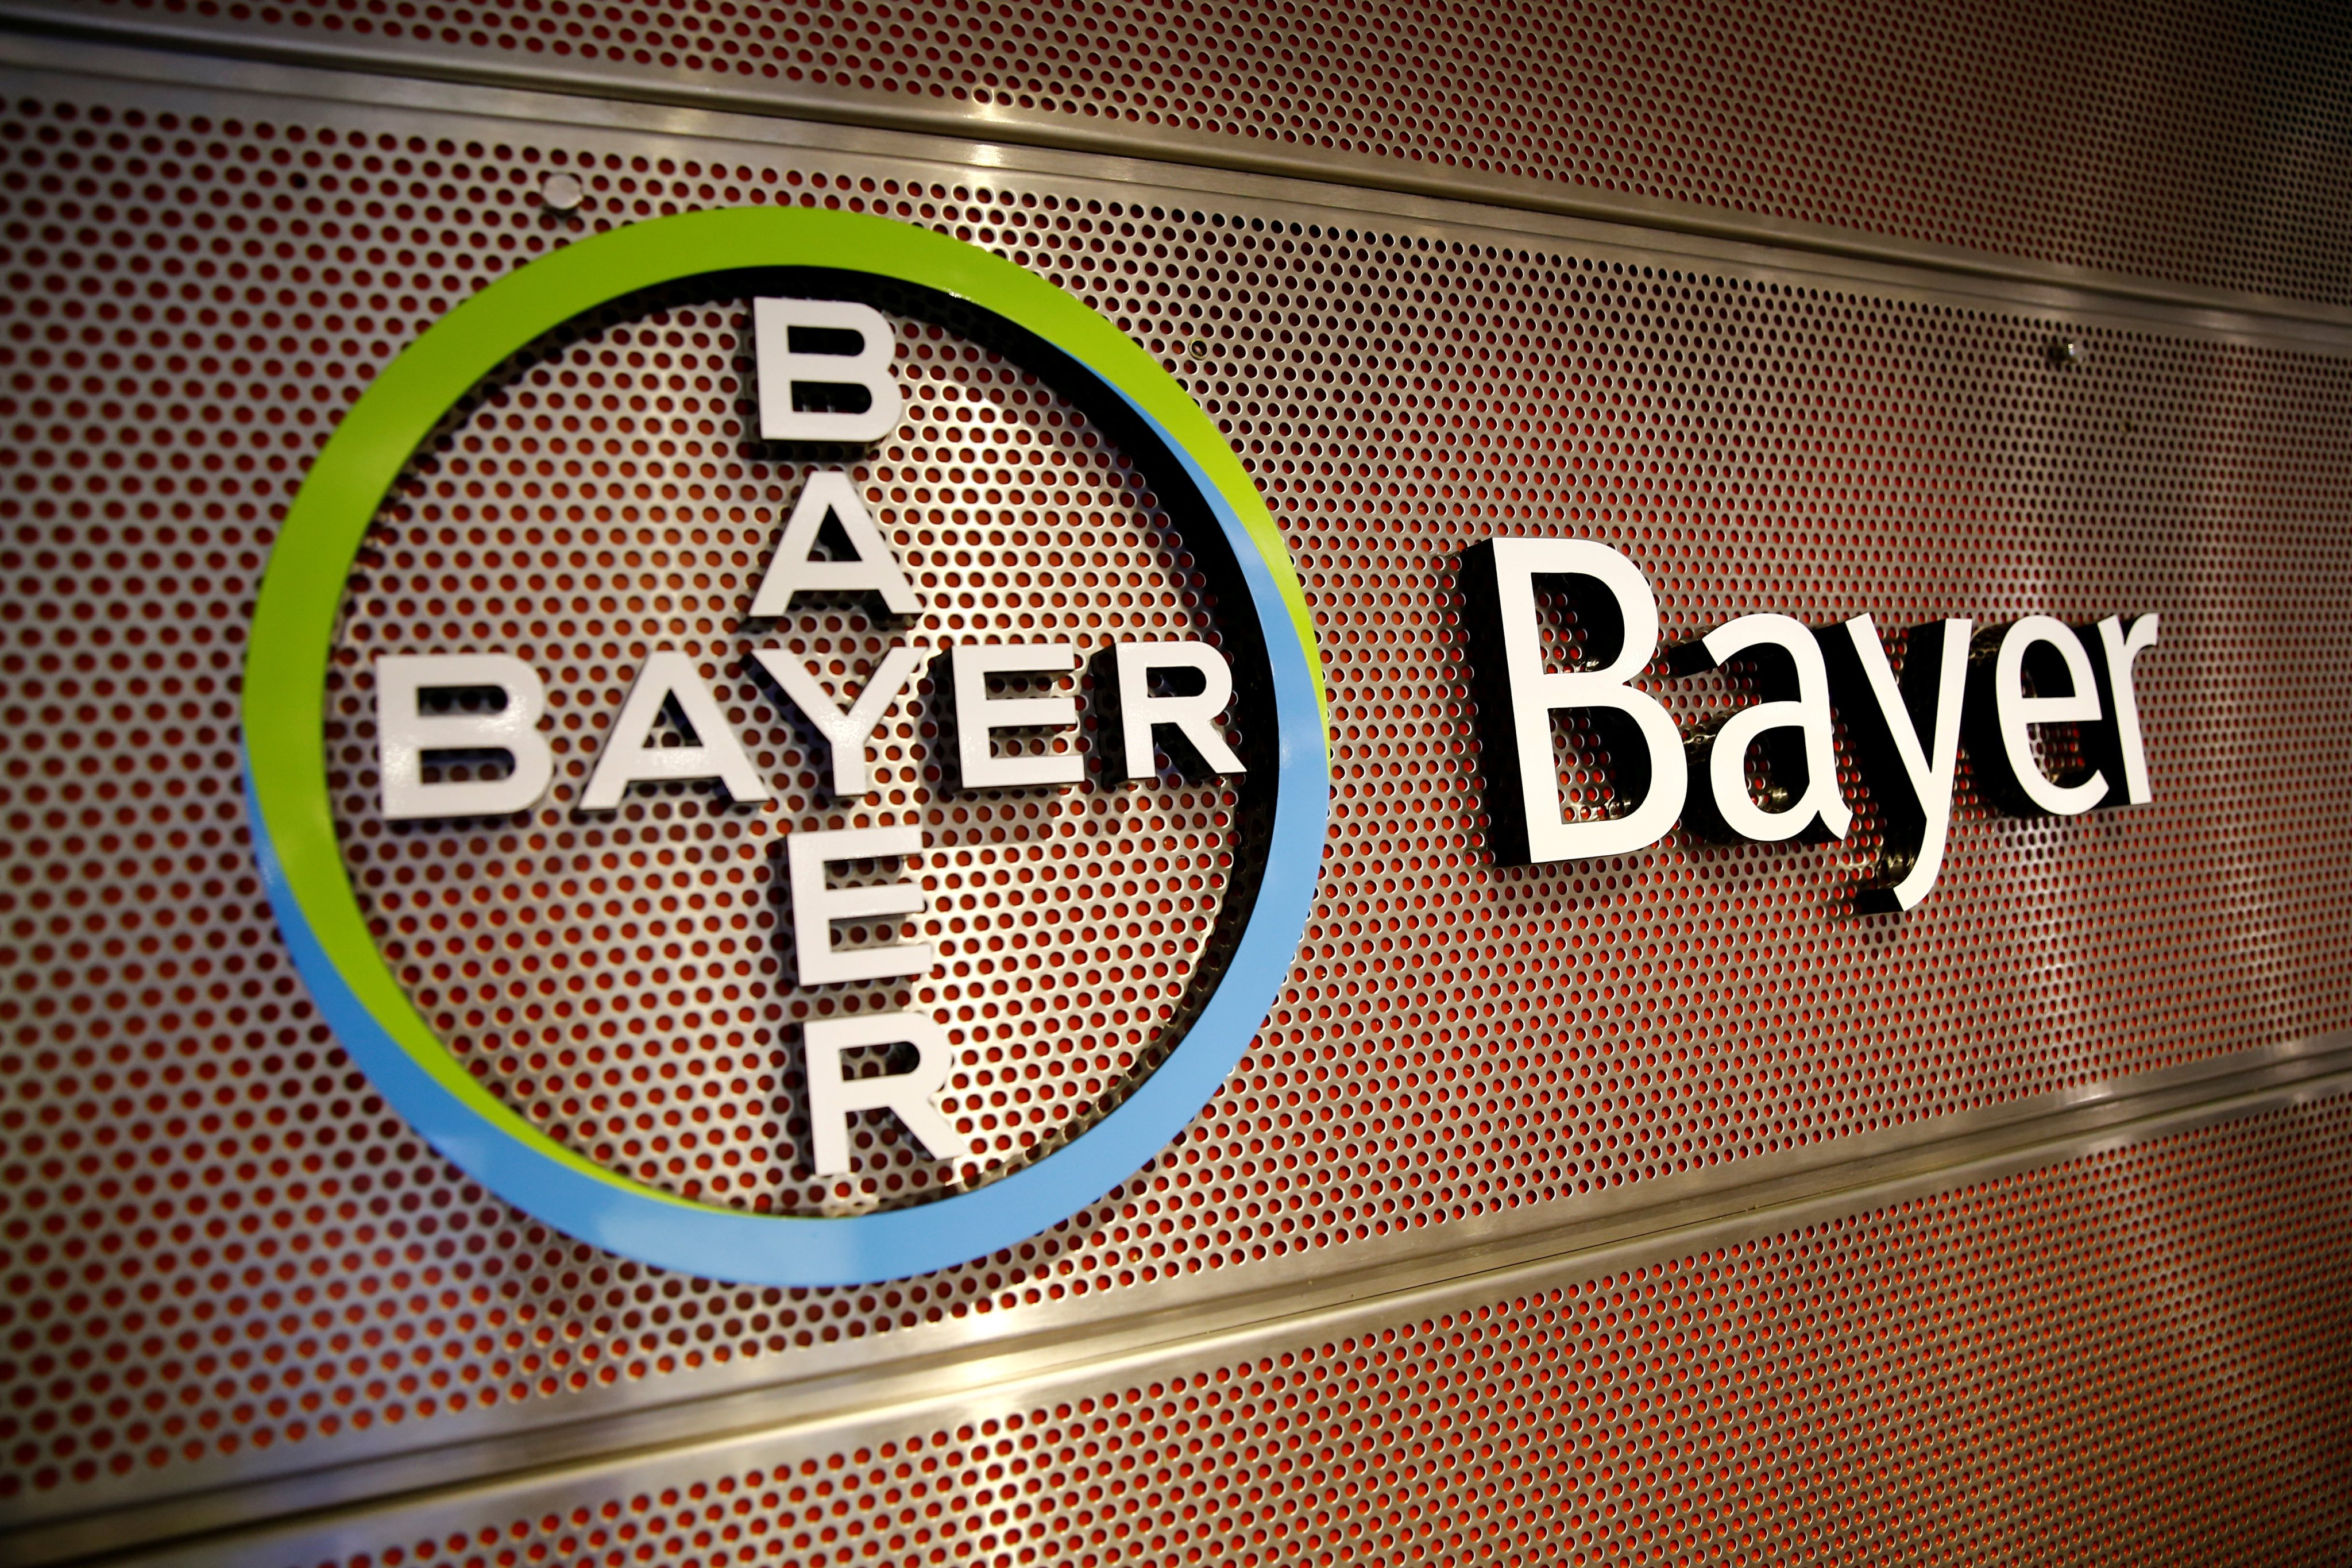 Logo of Bayer AG is pictured at the annual results news conference of the German drugmaker in Leverkusen, Germany February 27, 2019. Global issuers such as Bayer AG, BASF SE and Shangri-La Asia Ltd. are spearheading the surge in issuance of panda bonds. Photo: Reuters